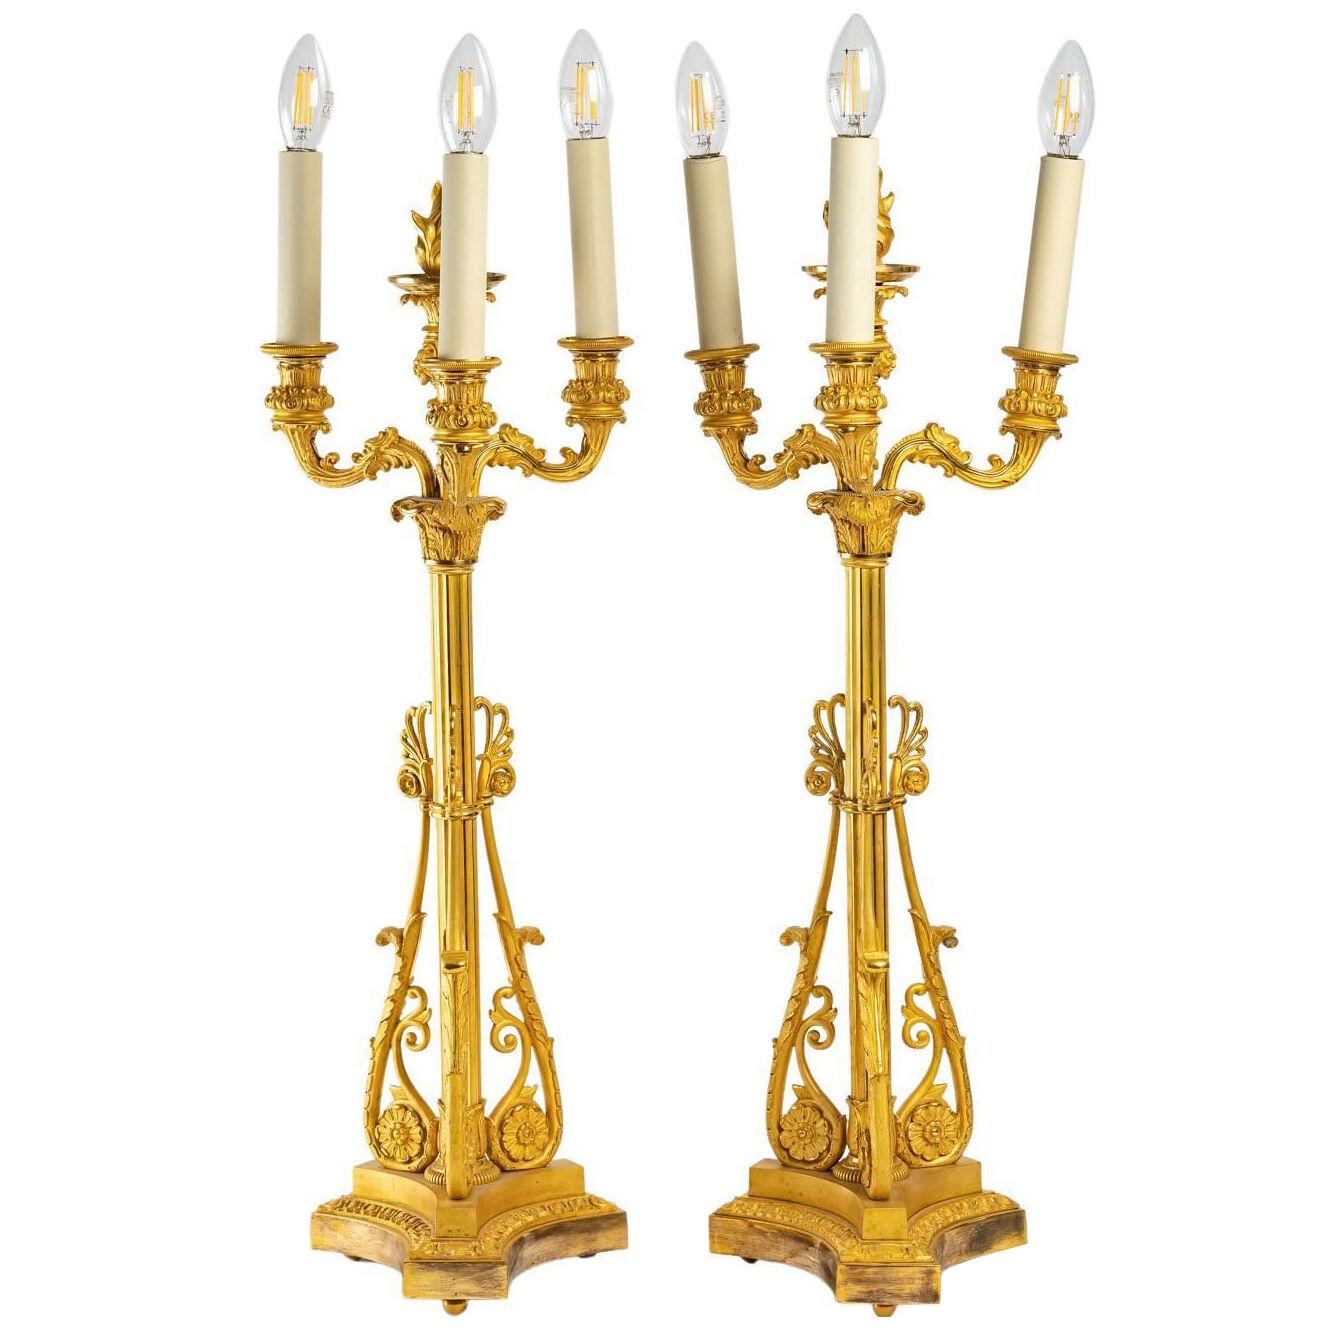 Pair of Early 19th Century Gilt Bronze Candlesticks